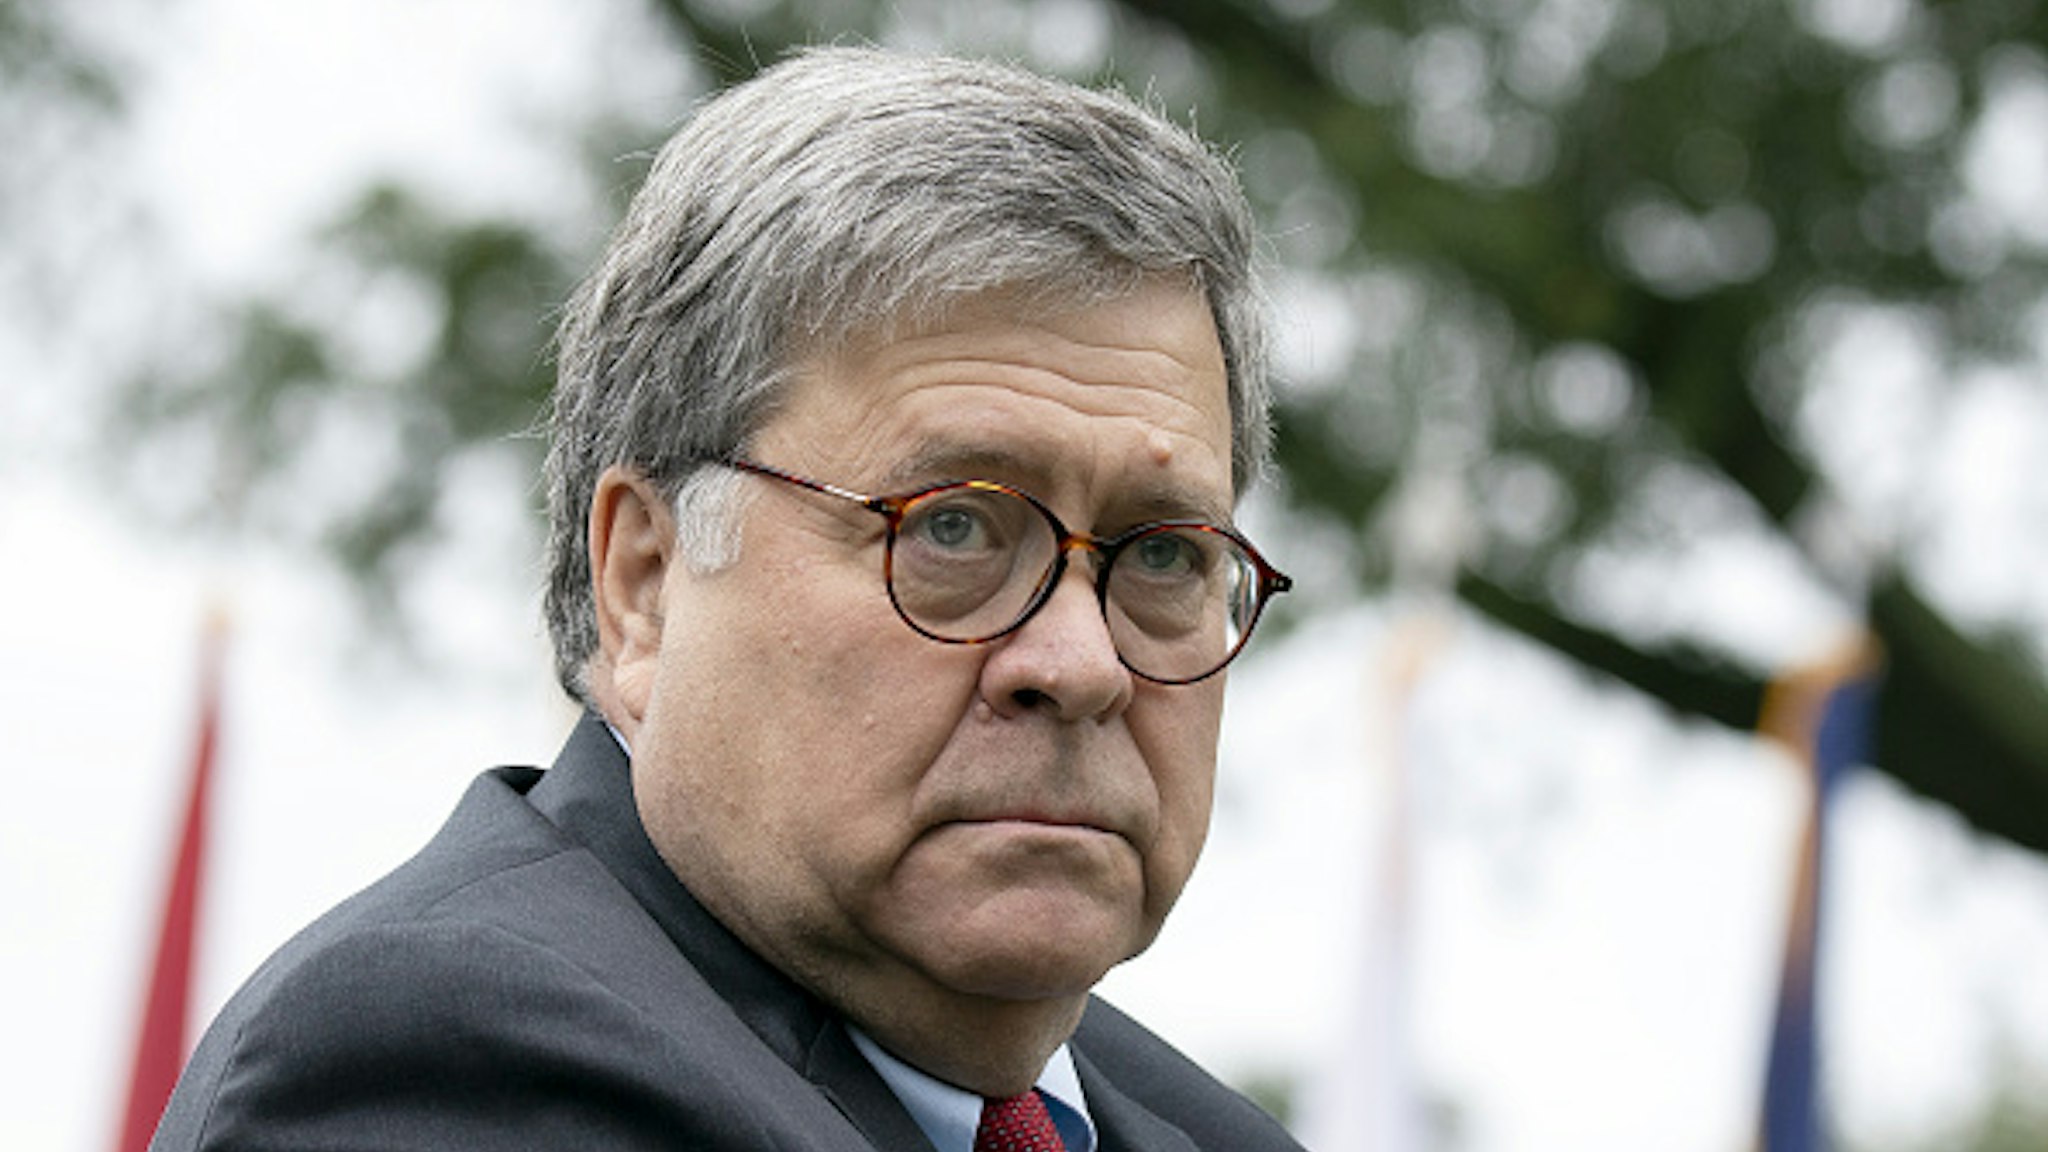 William Barr, U.S. attorney general, arrives for the announcement of U.S. President Donald Trump's nominee for associate justice of the U.S. Supreme Court during a ceremony in the Rose Garden of the White House in Washington, D.C., U.S., on Saturday, Sept. 26, 2020. Trump said hell nominate Judge Amy Coney Barrett for the Supreme Court, adding his third justice to the bench and a fresh jolt to his faltering campaign just weeks before Americans vote on whether to give him a second term.